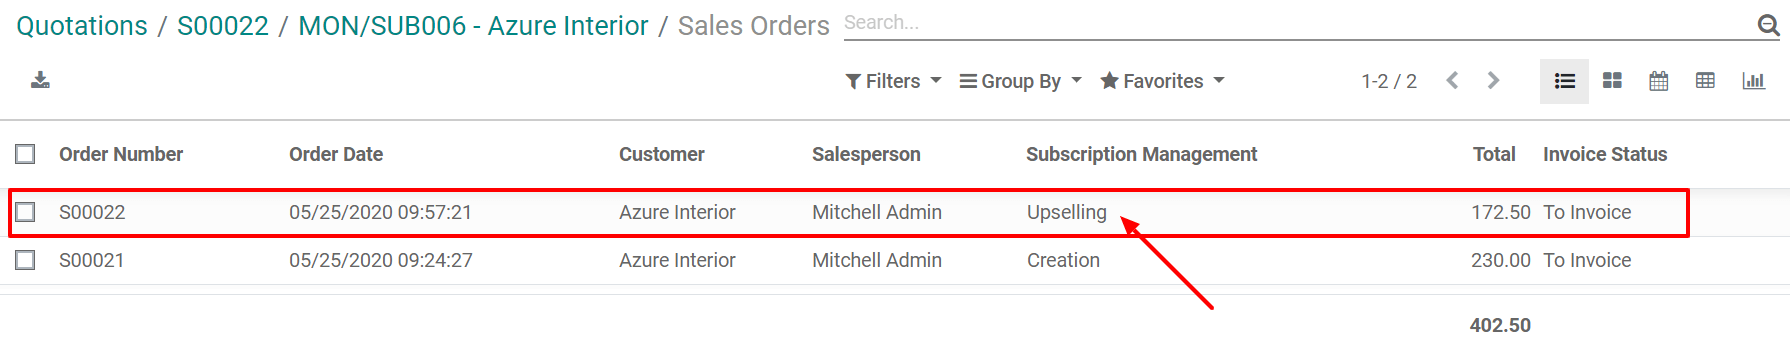 List view of all sales orders created for a subscription